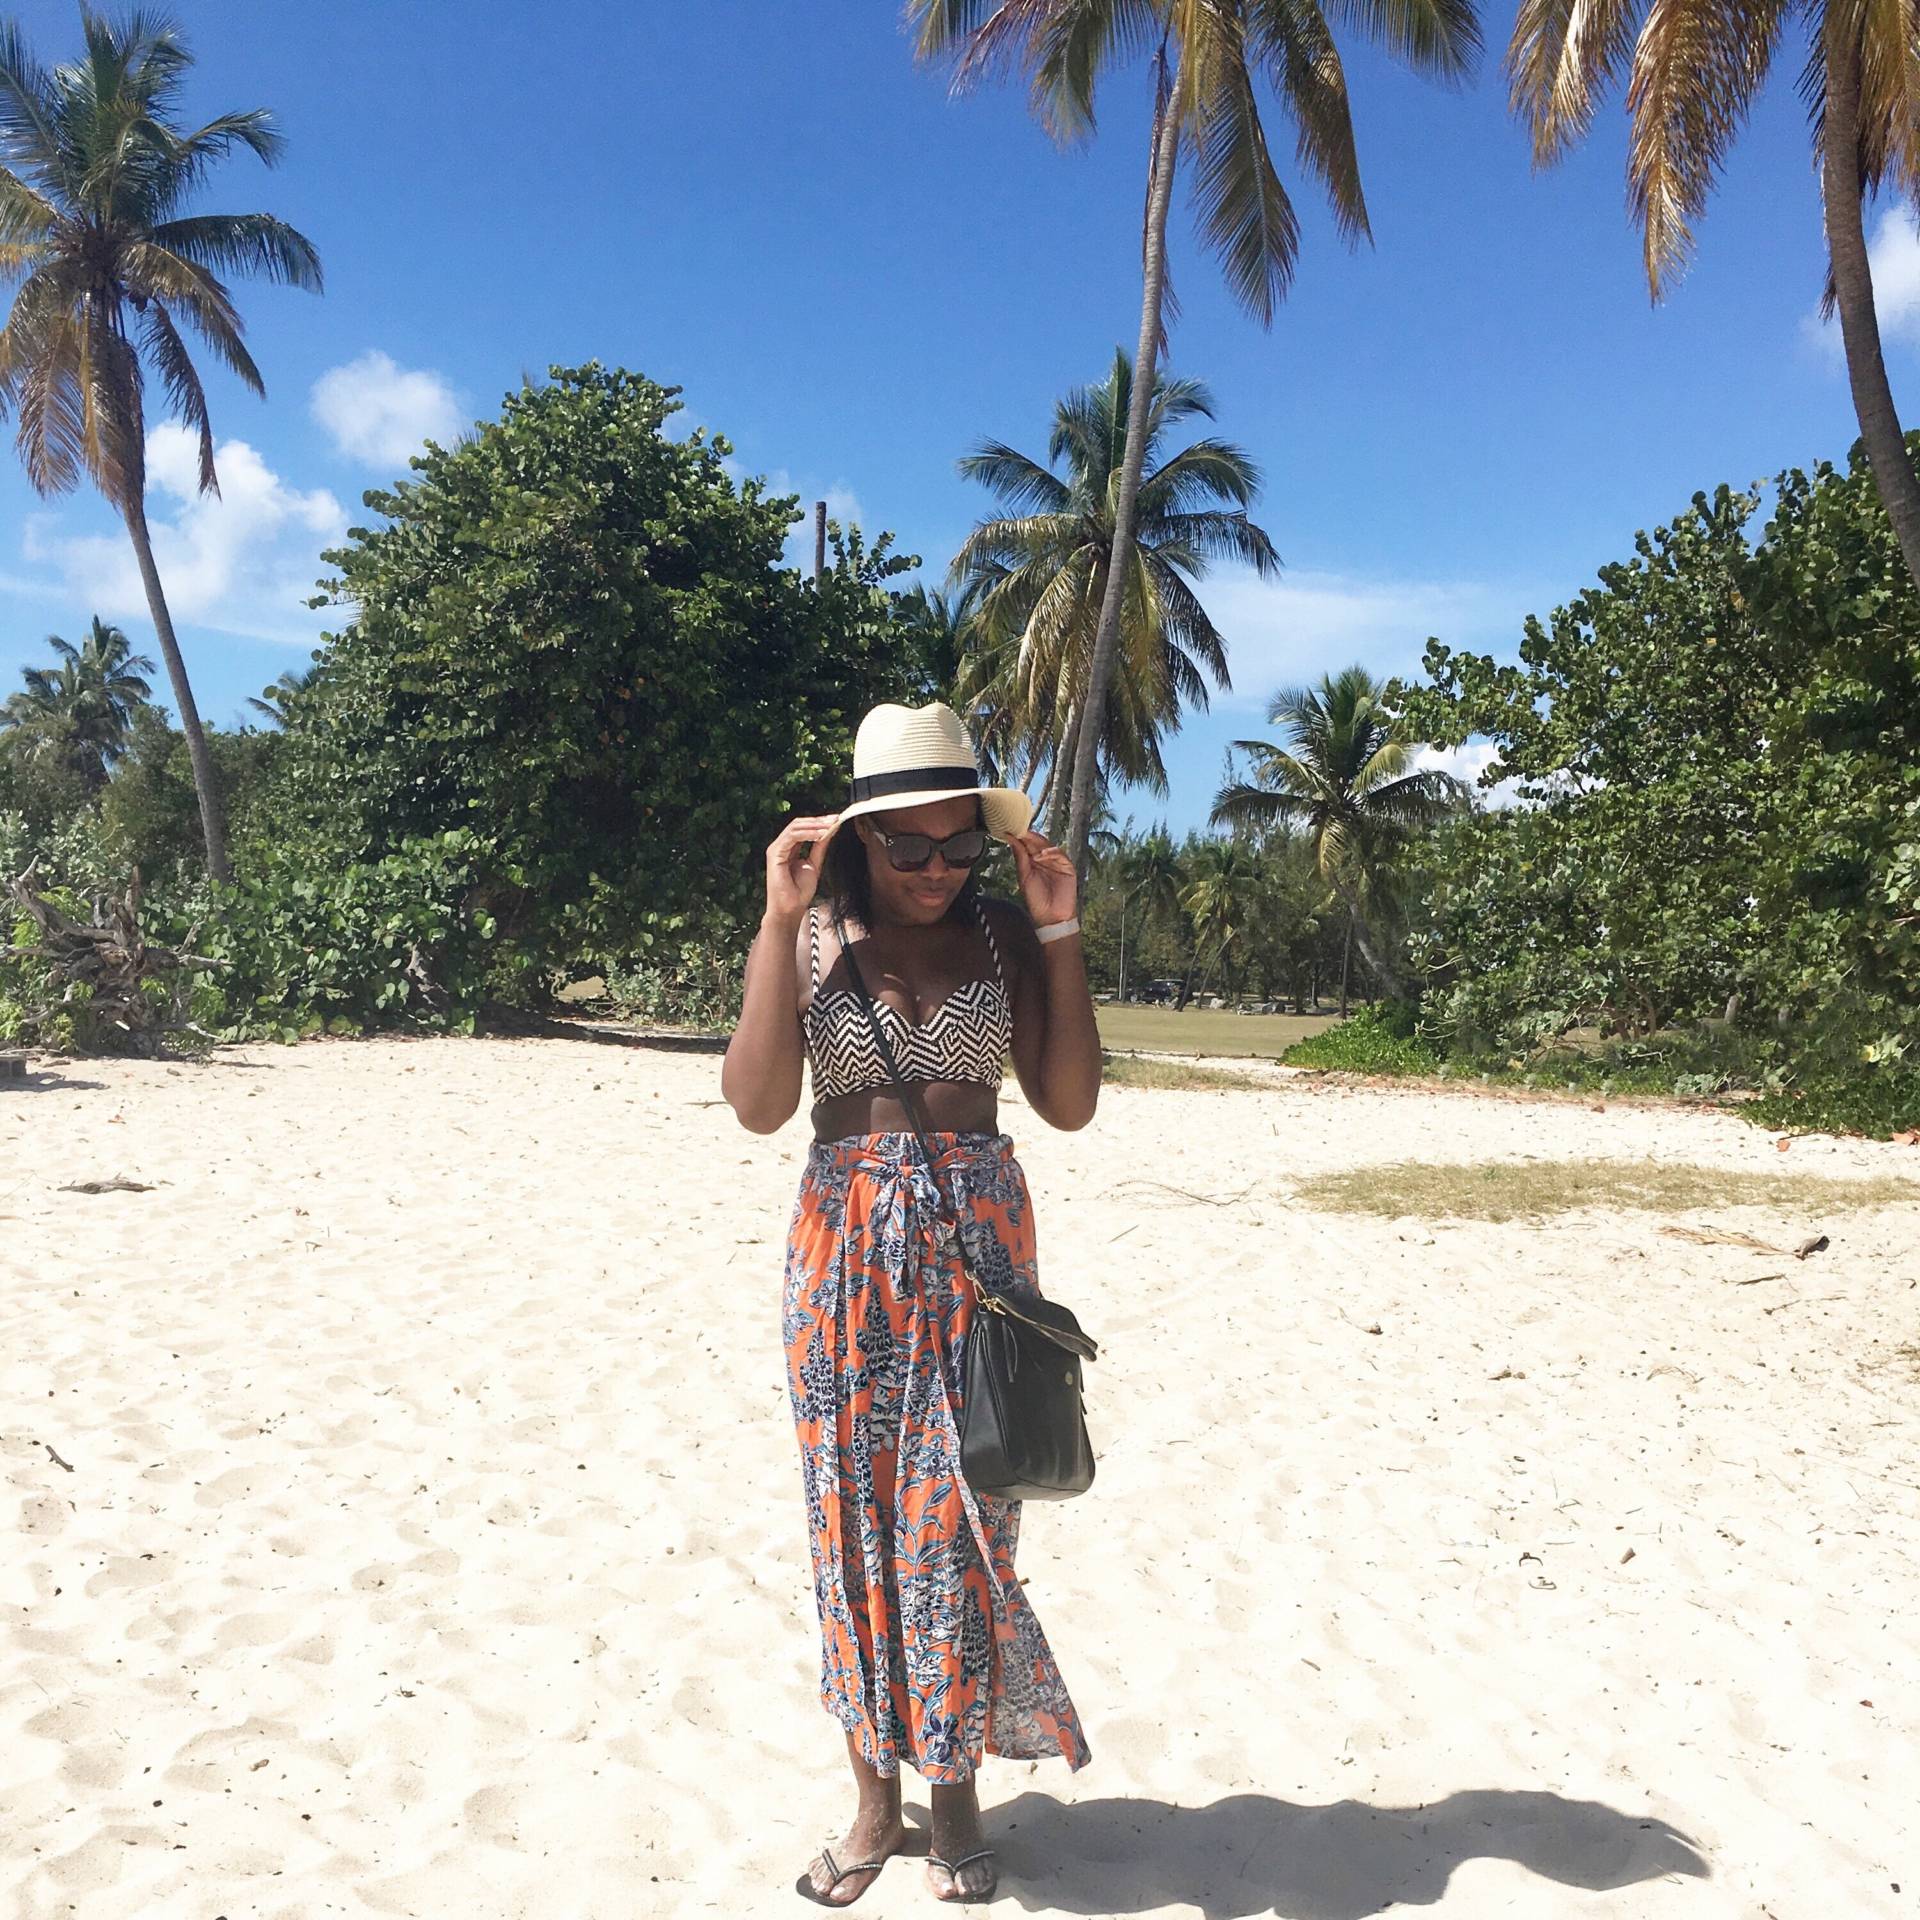 Instagram Roundup: Caribbean Cruise Vacation - Le Fab Chic